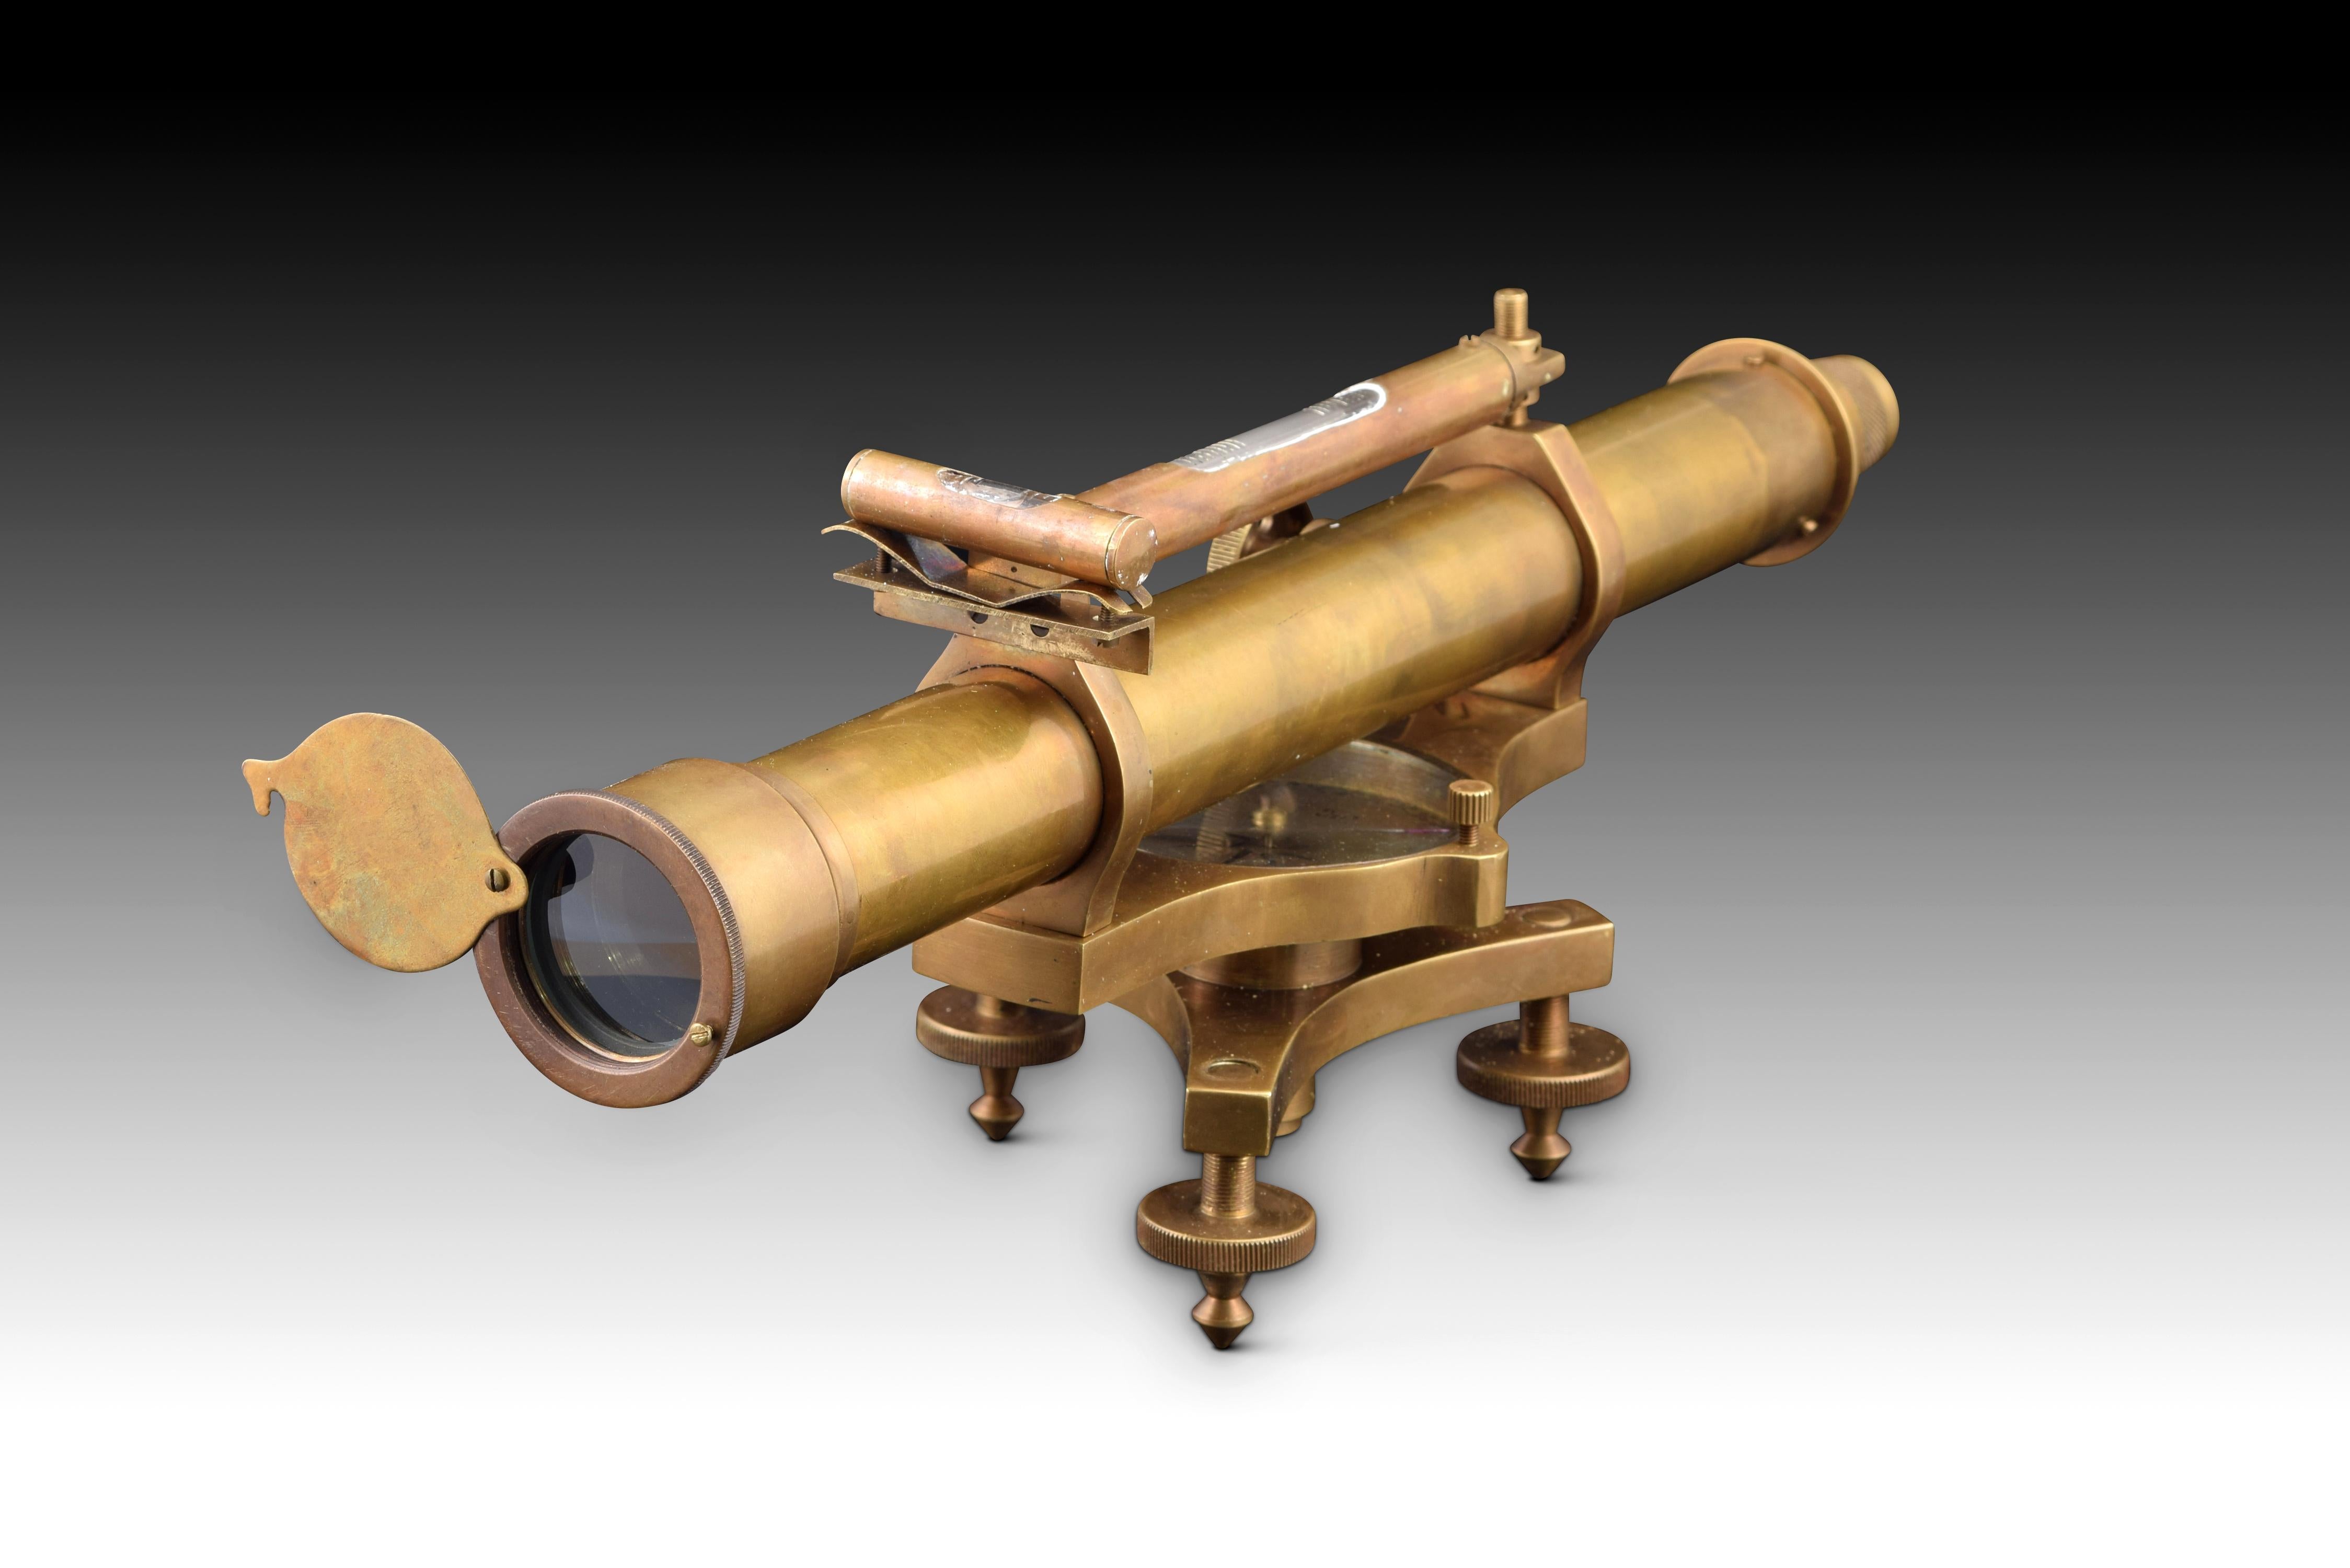 Telescope with decorative level. Metal. 
Small decorative telescope with top level and three adjustable legs that also has a compass and bubble levels.